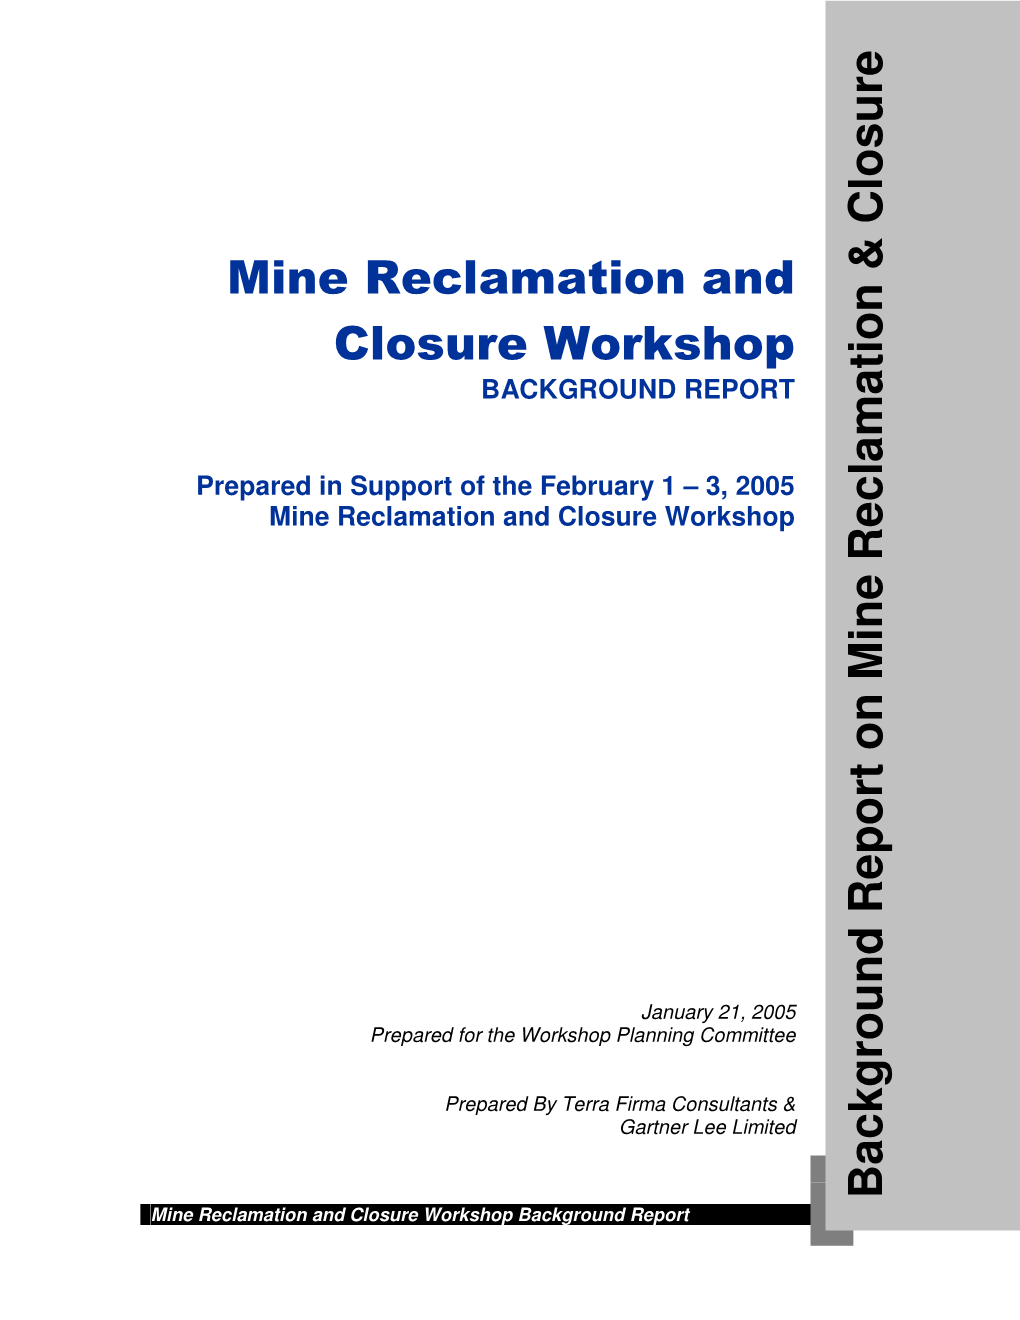 Mine Reclamation and Closure Components